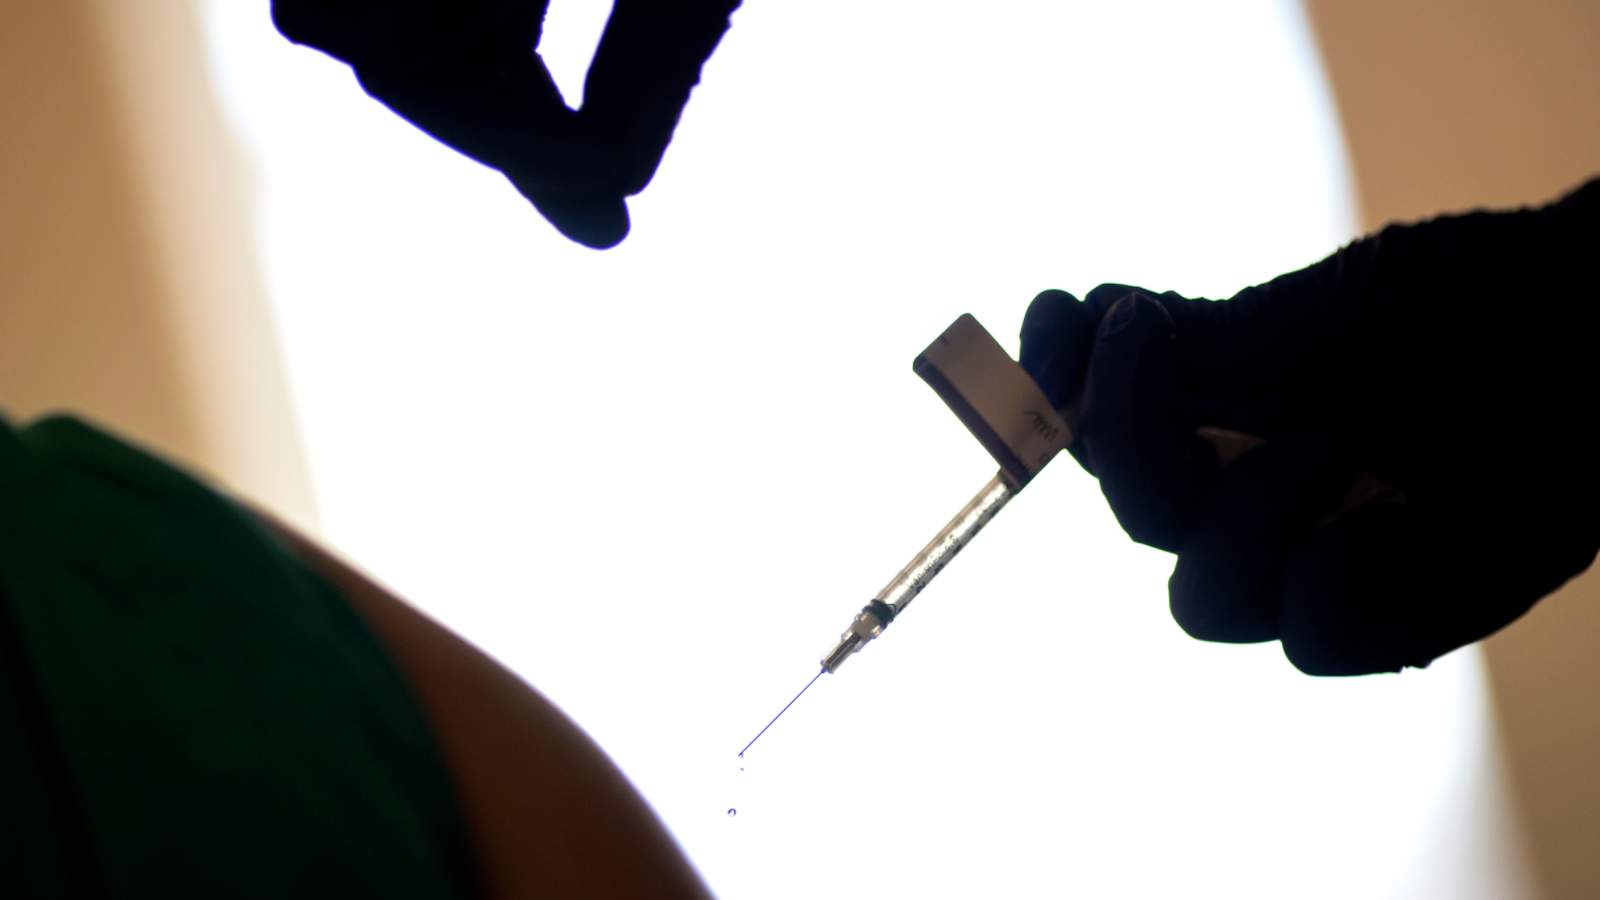 WATCH LIVE: Department of Defense gives briefing on COVID-19 vaccination effort